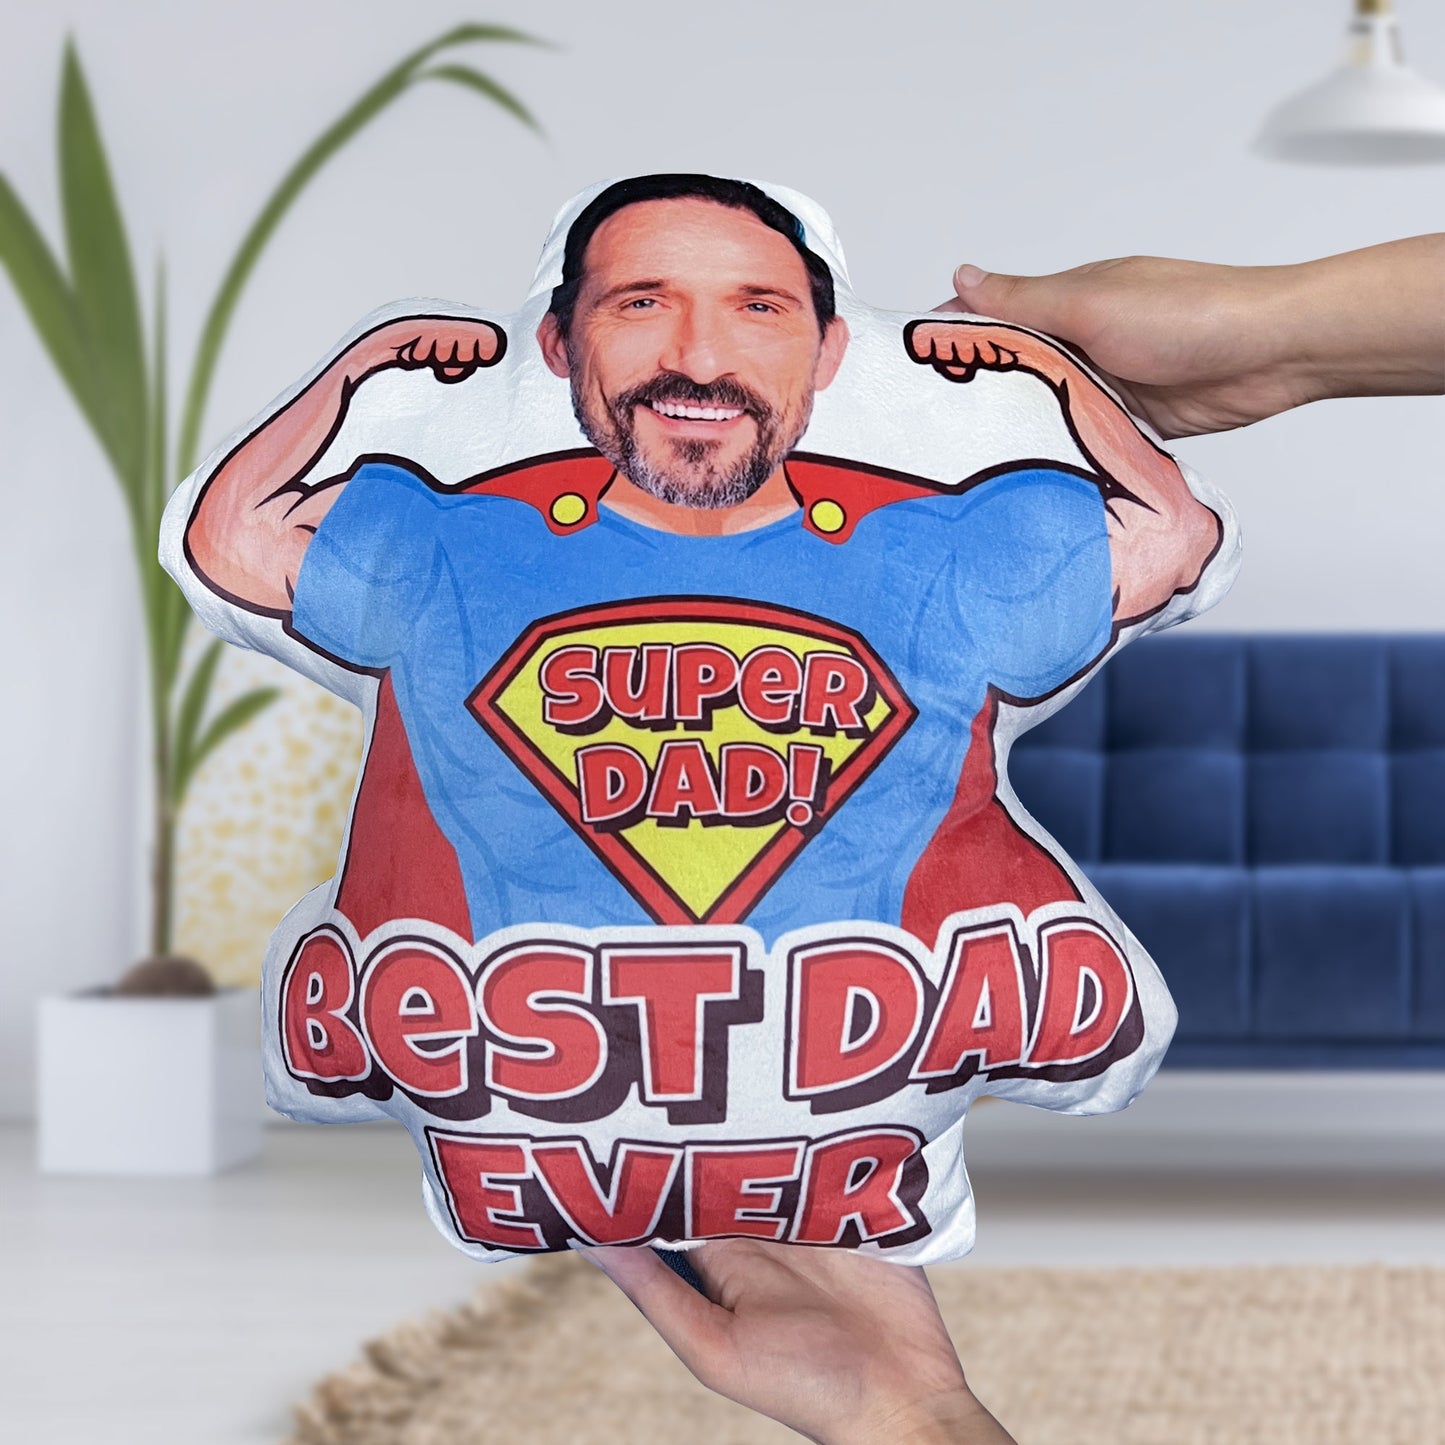 Super Dad For Best Dad Ever - Personalized Photo Custom Shaped Pillow